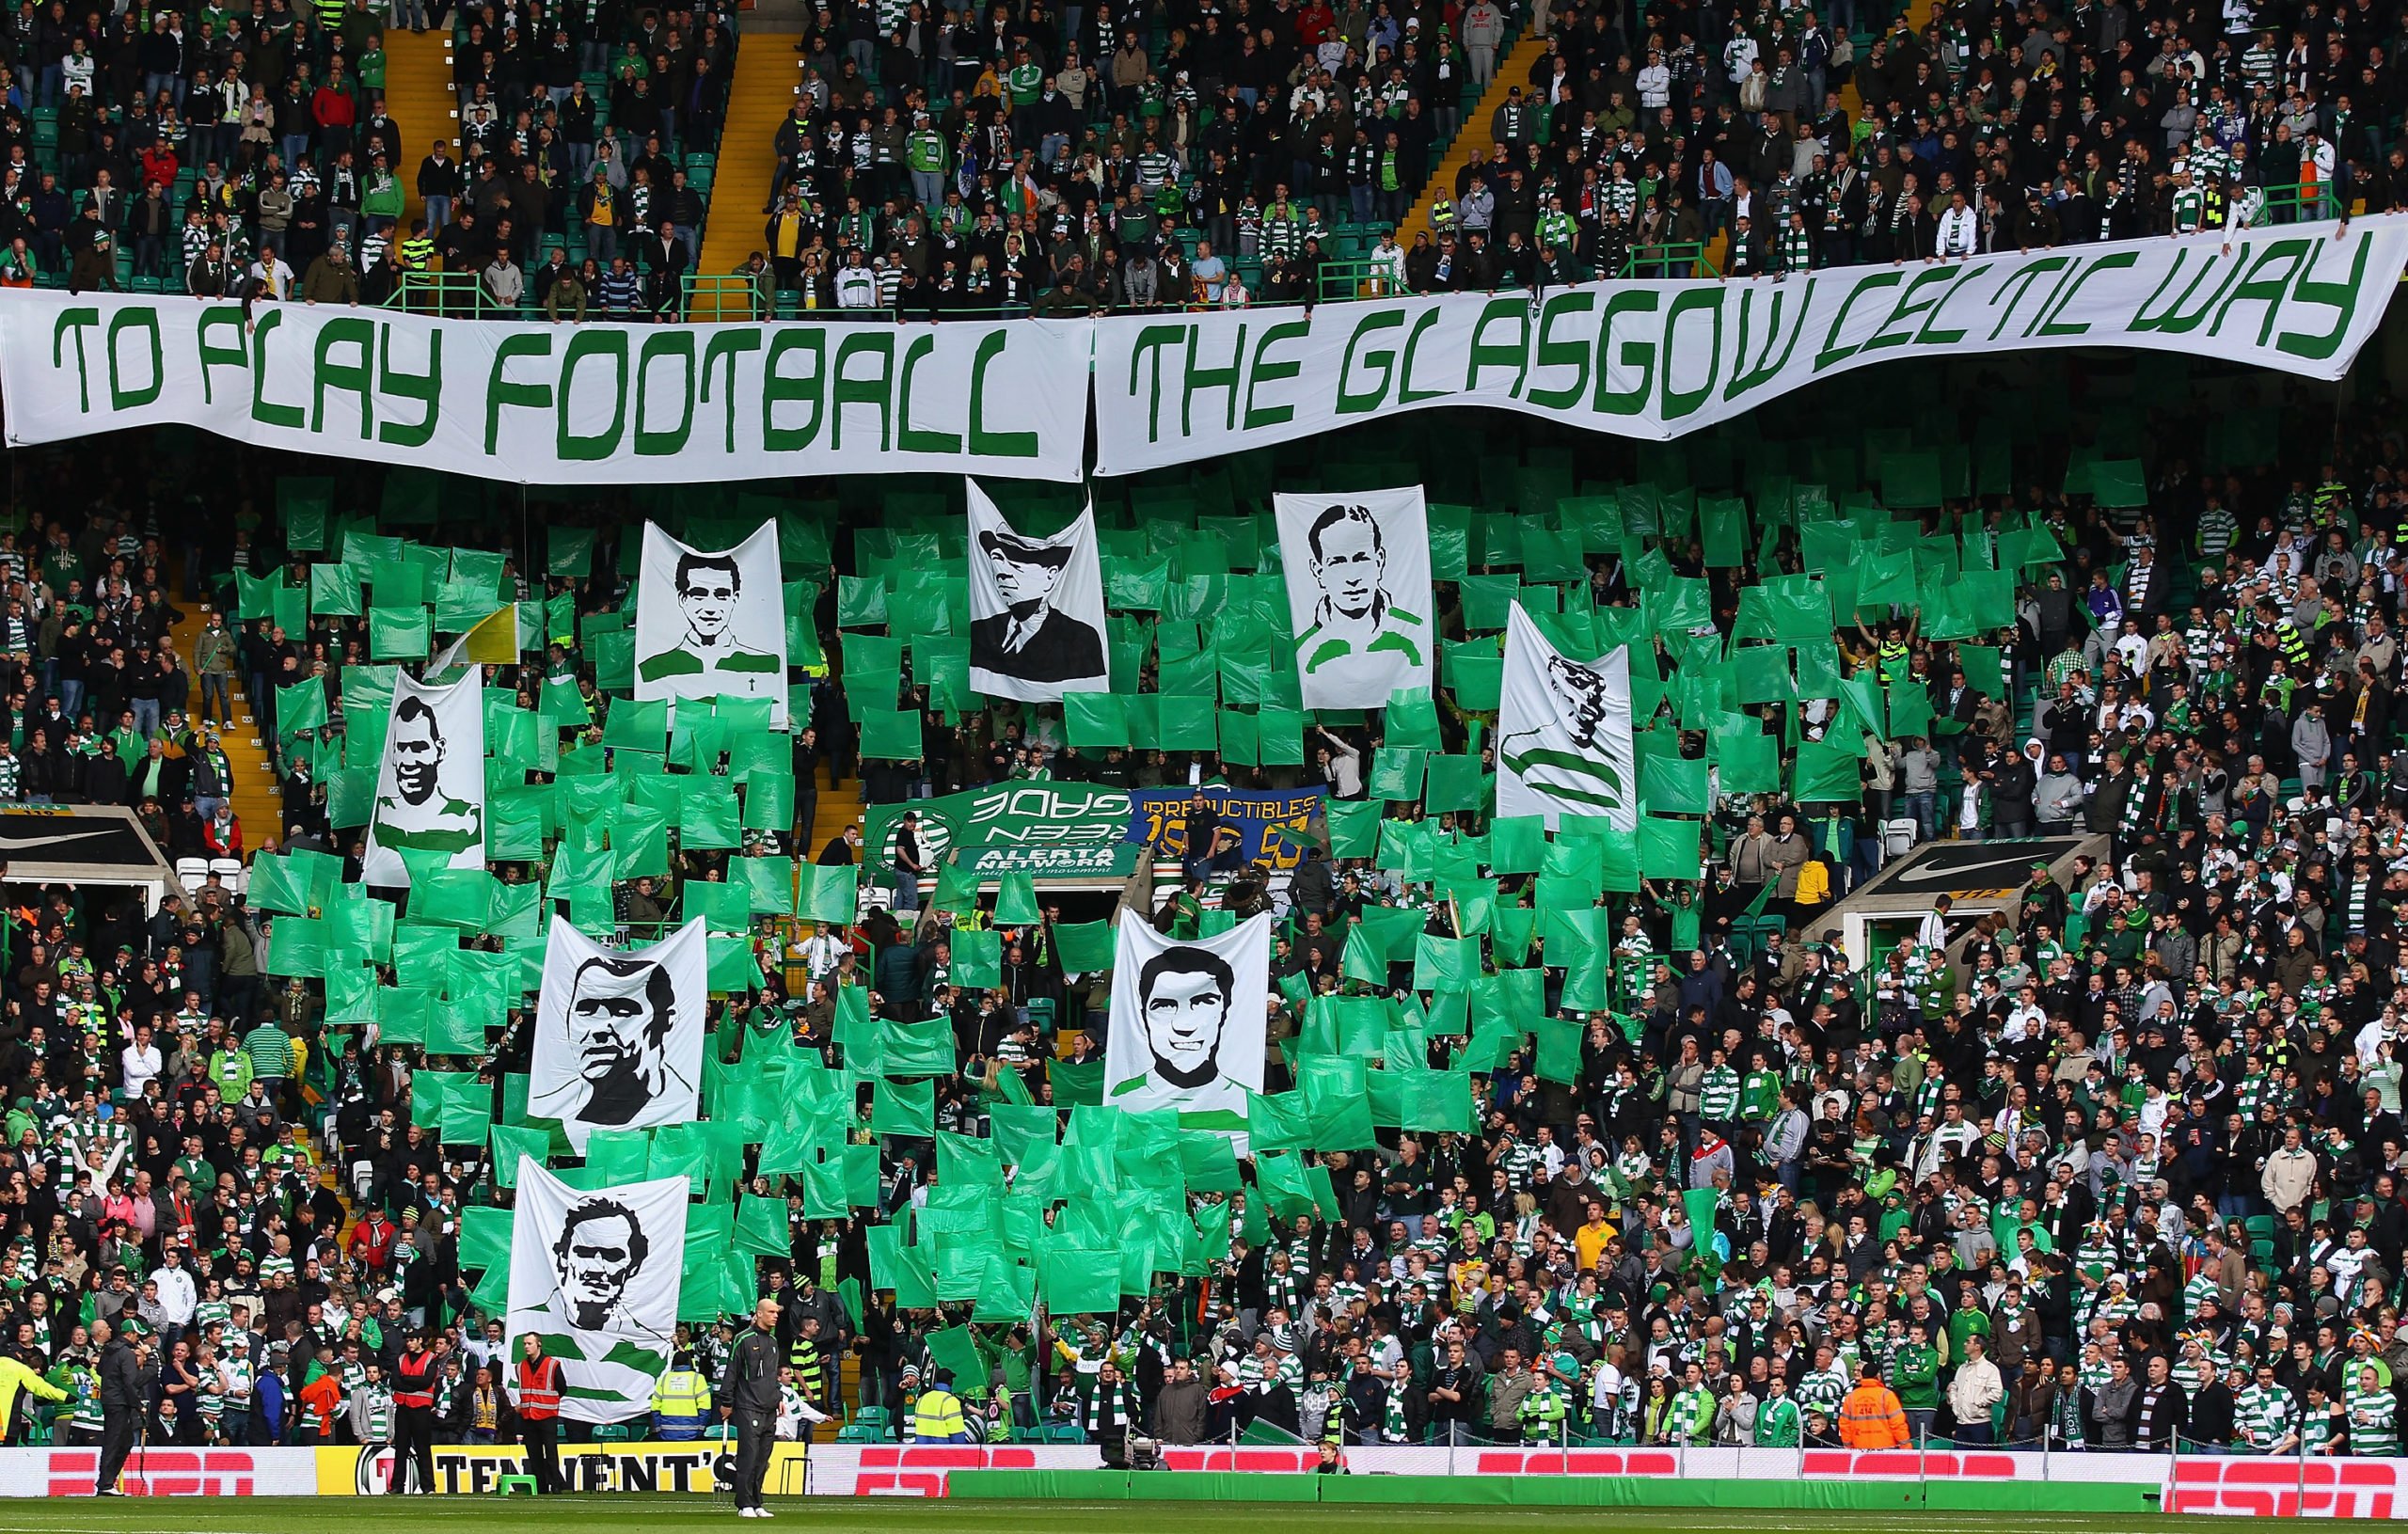 The Green Brigade unveil new protest banner at Celtic Park